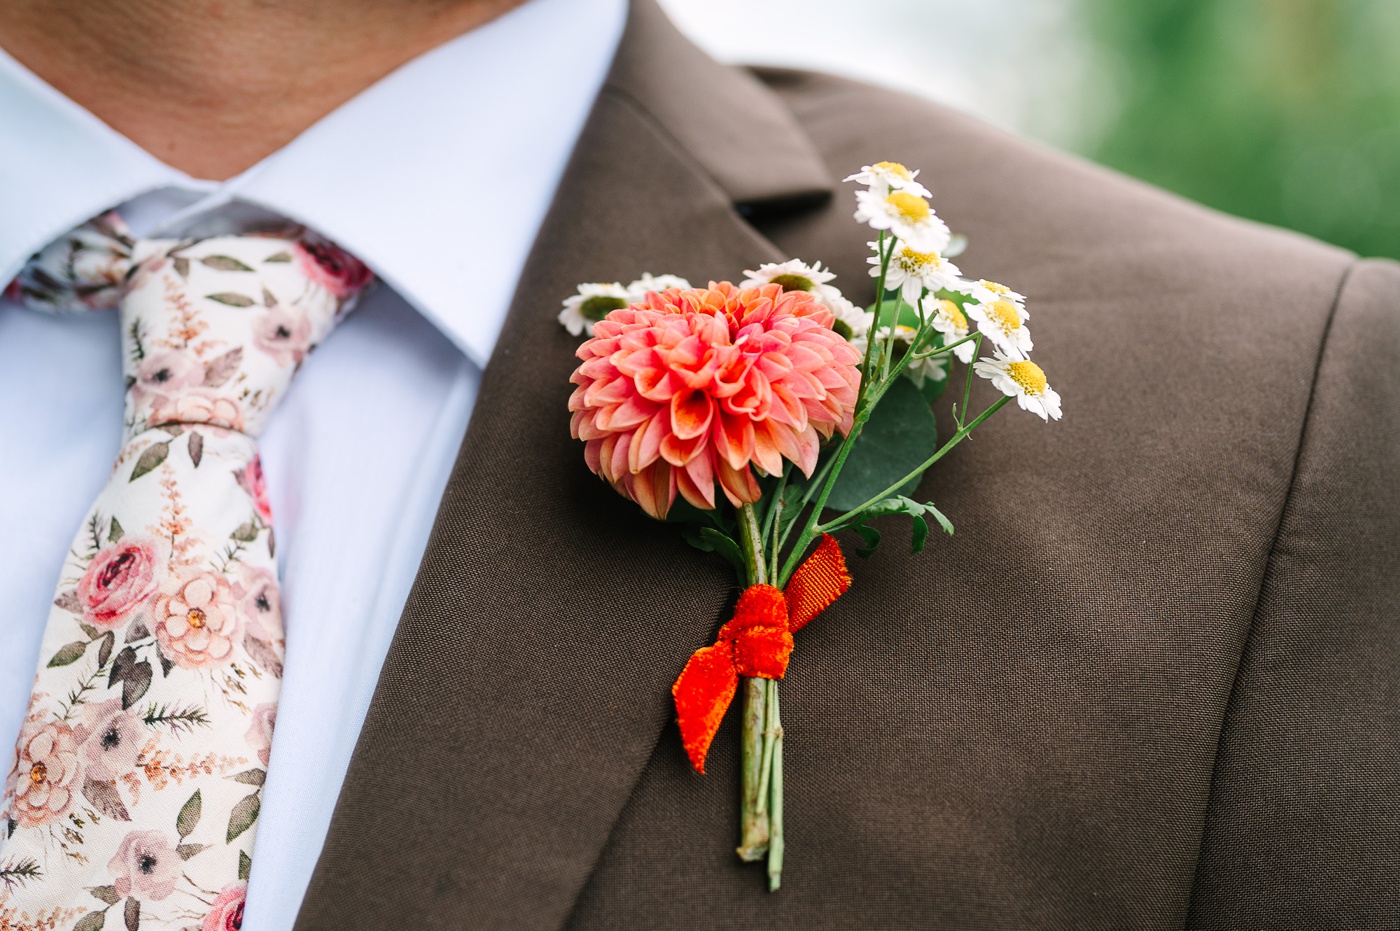 Spring wedding boutonniere filled with an orange dahlia and miniature daisies